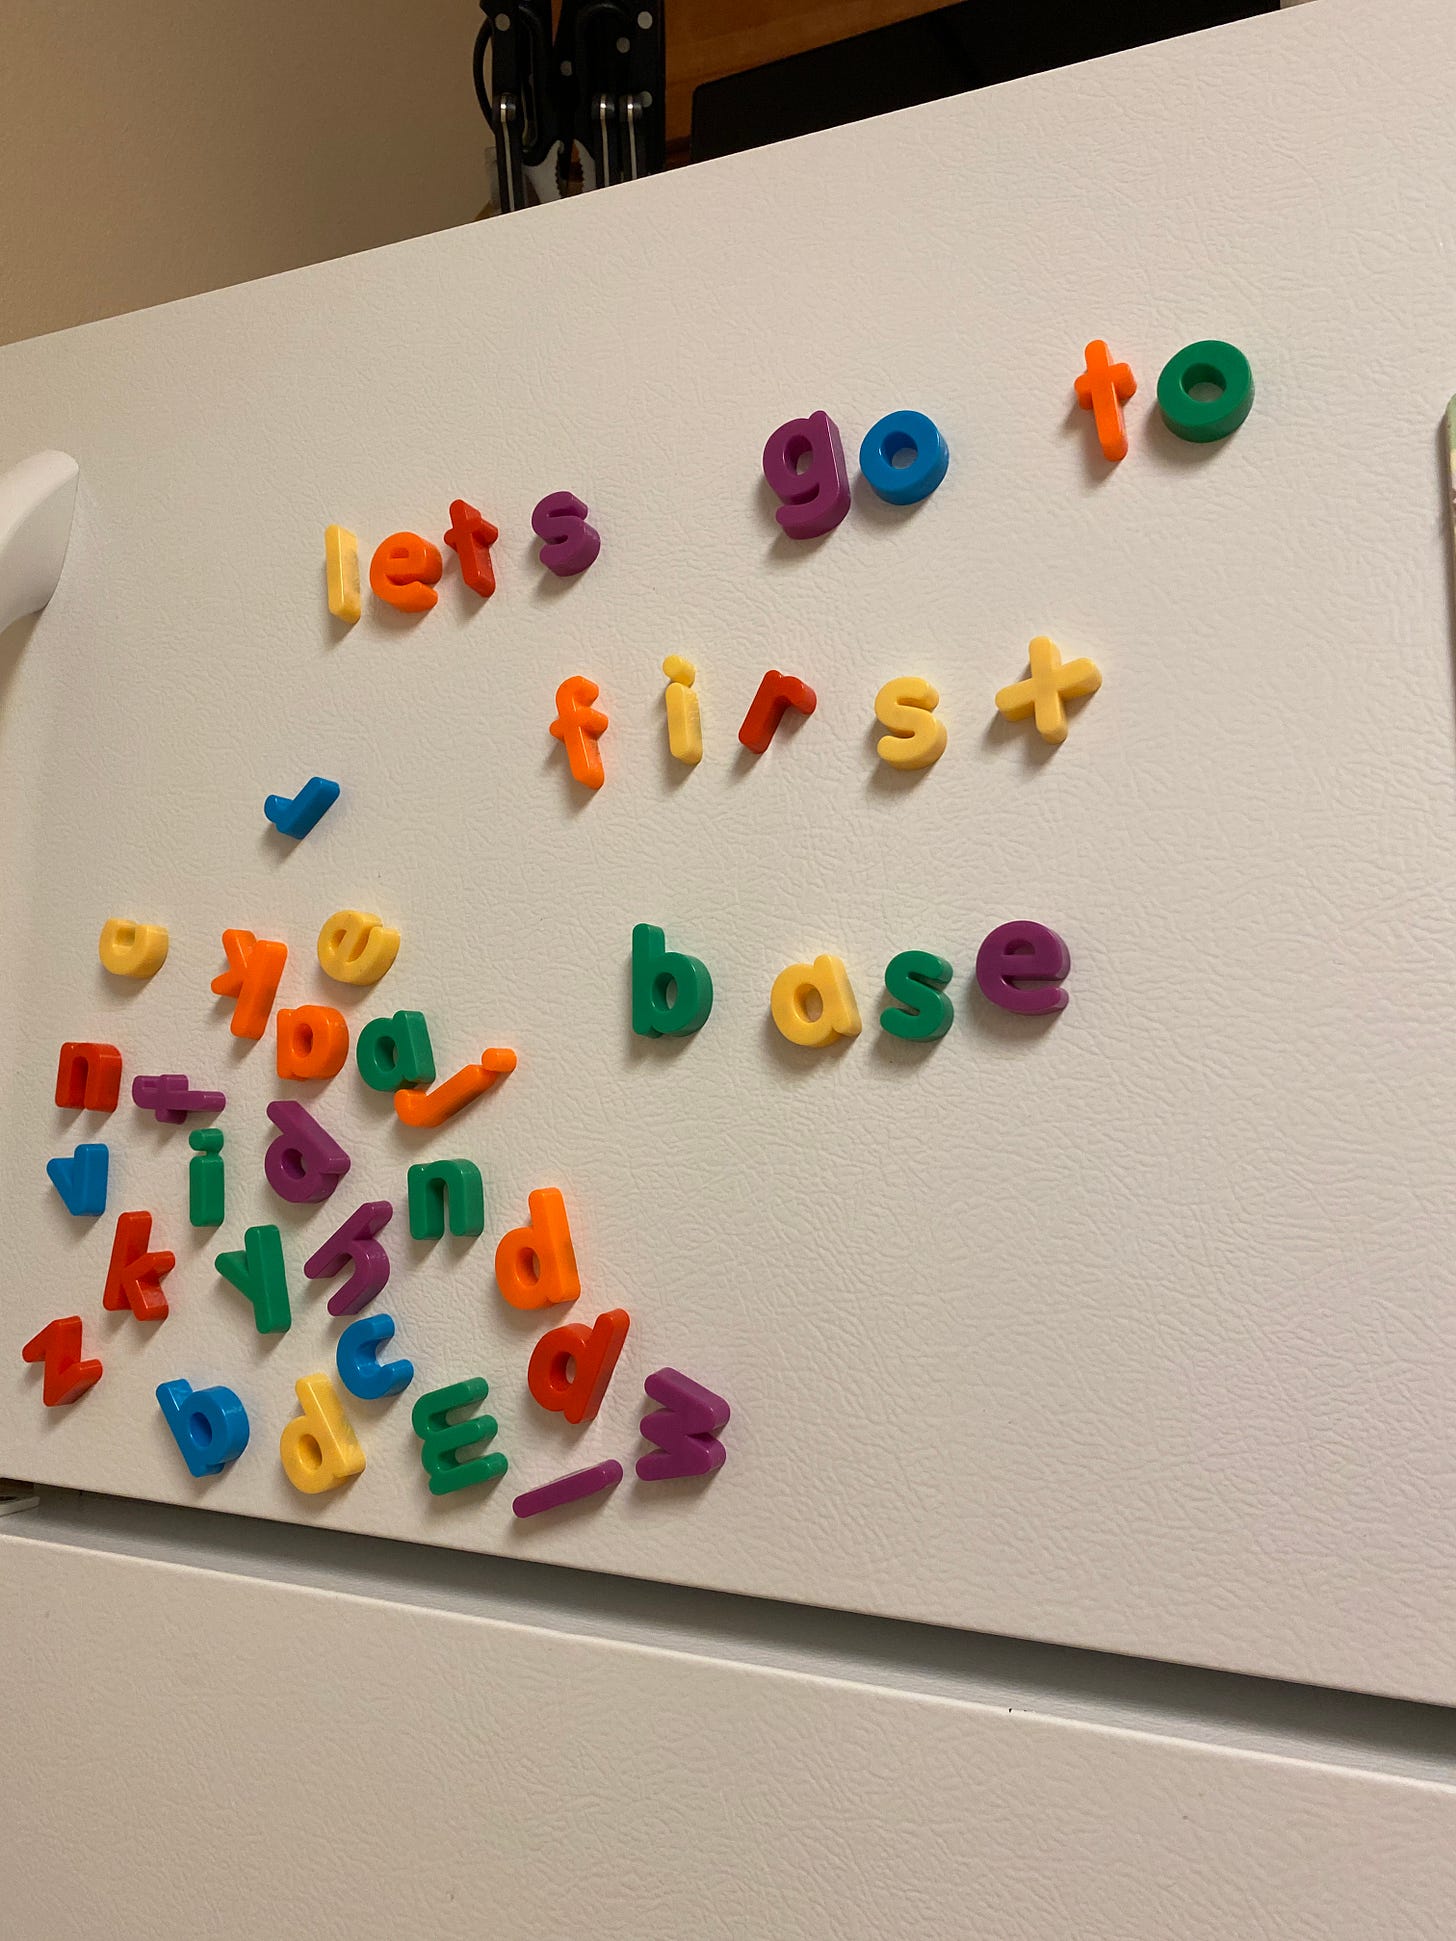 Photo of fridge, alphabet letters read, "lets go to first base"